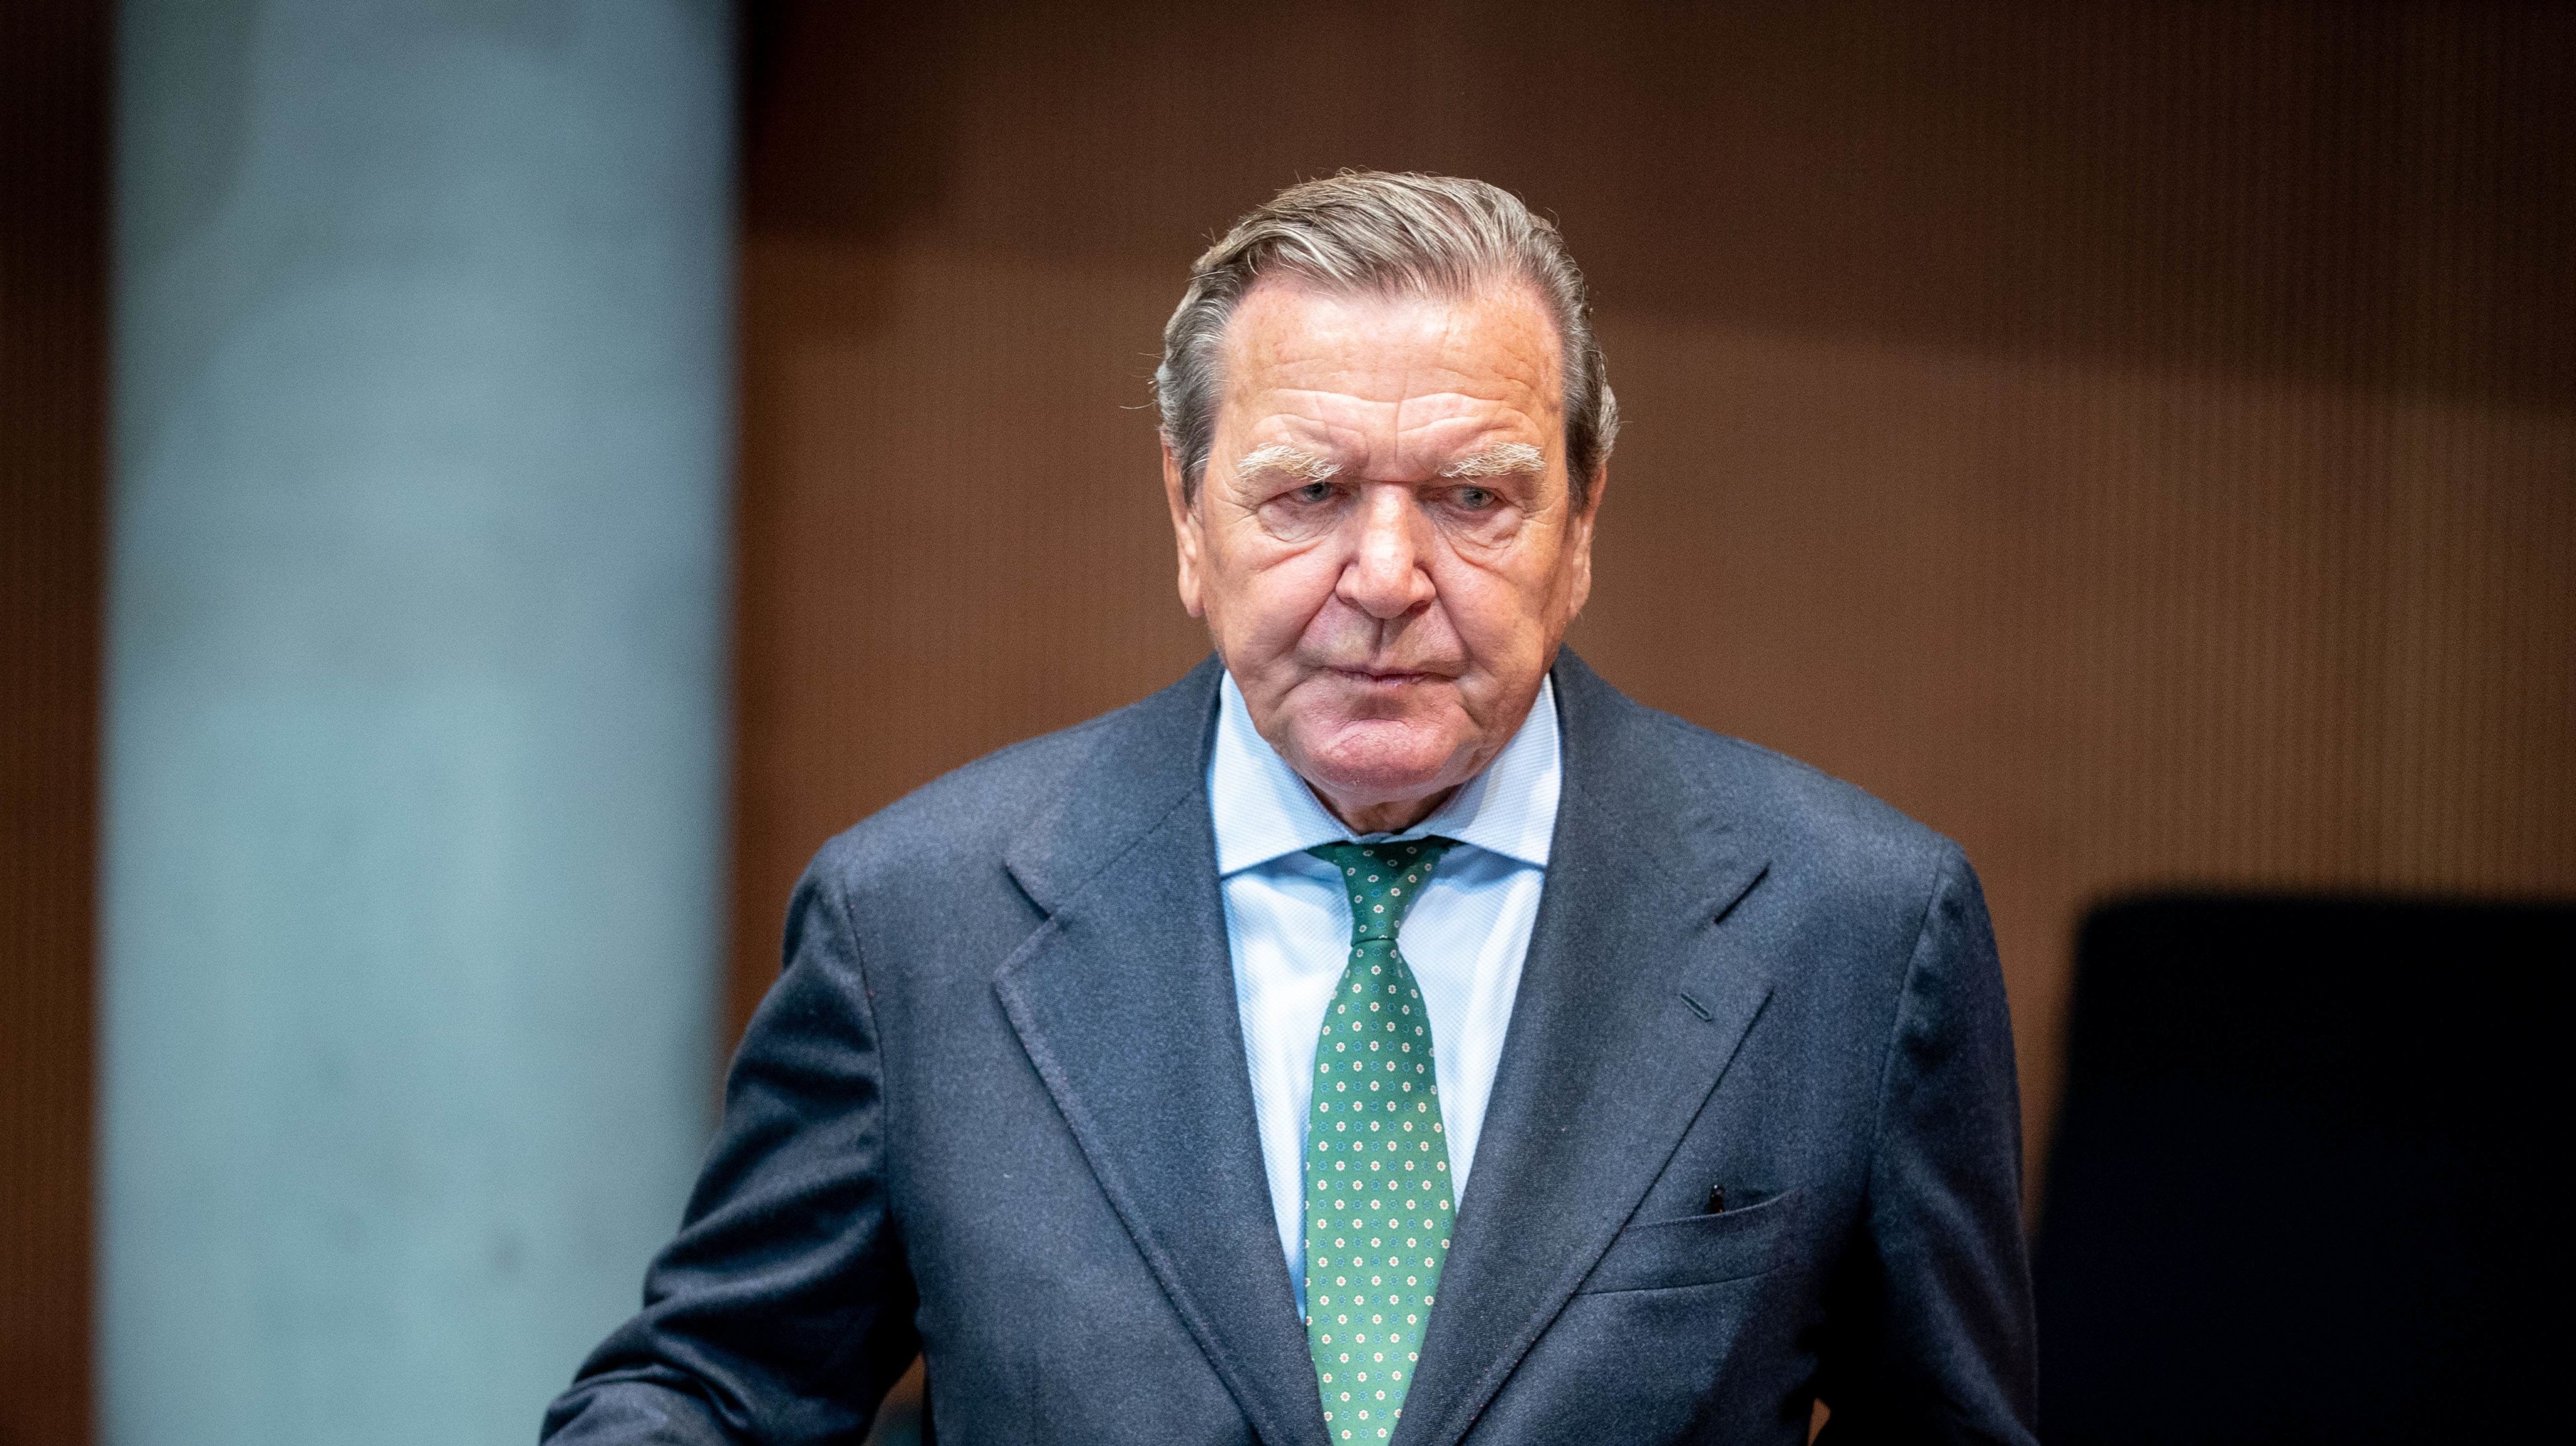 Ex-Chancellor Schröder at hearing in the Economic Committee